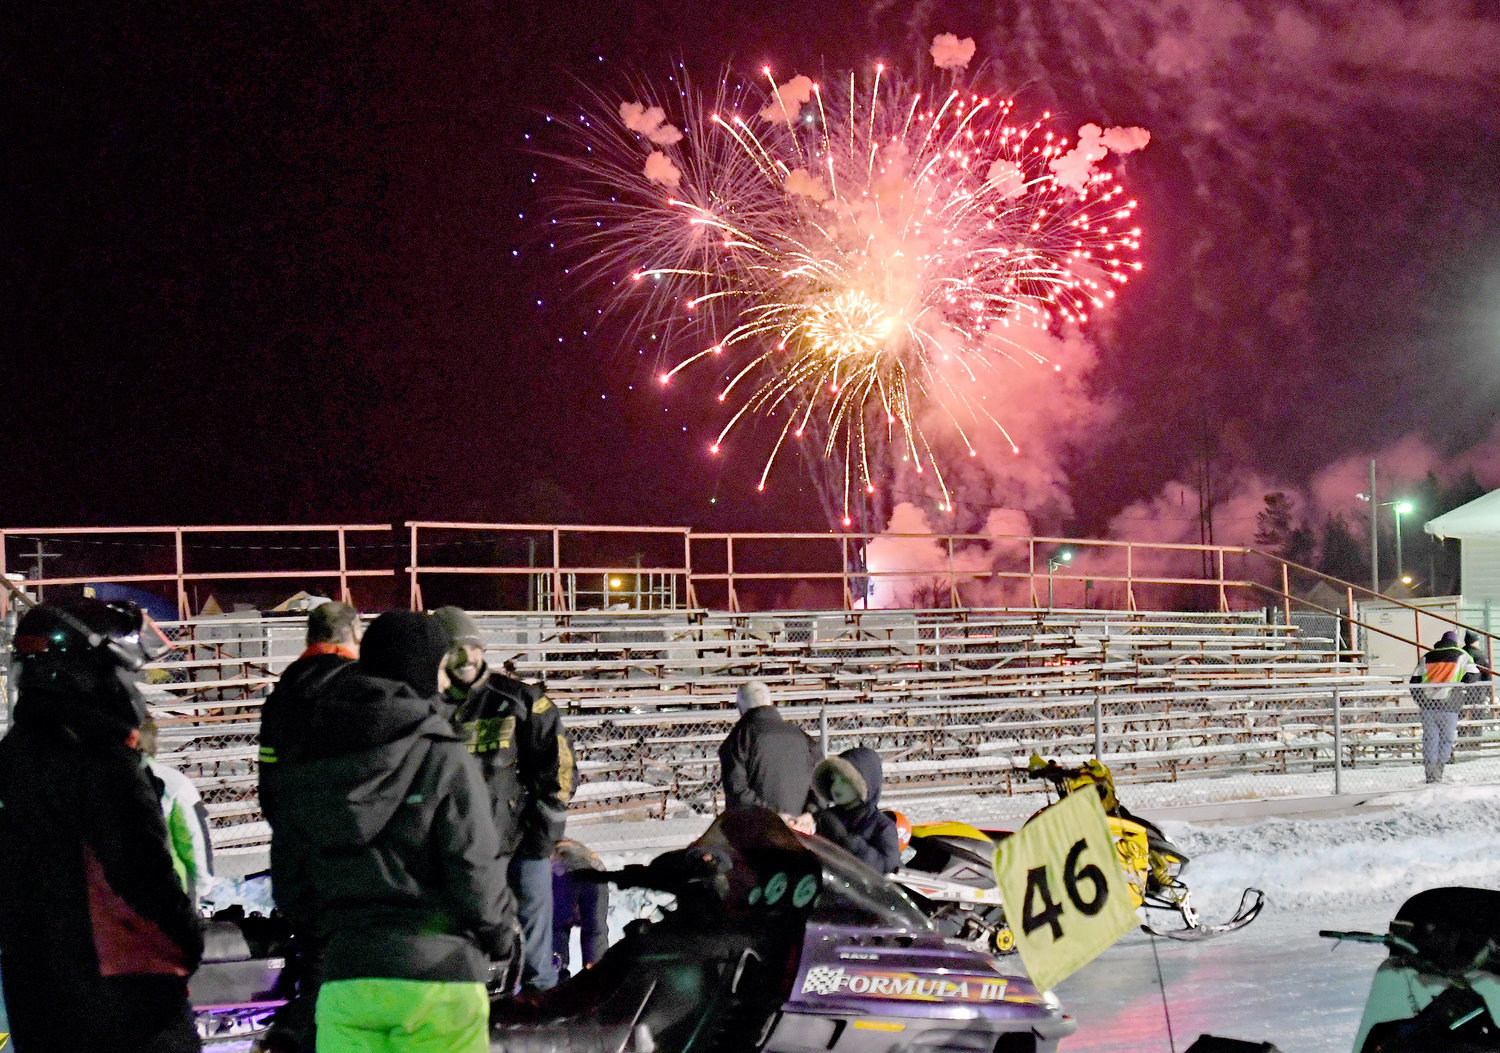 SNOW FESTIVAL FIREWORKS - Fireworks by Majestic will once again be part of the opening ceremonies Friday evening, Jan. 27. The fireworks will be visible from the Boonville Fairgrounds starting at approximately 7:15 p.m. Community donations for the fireworks have been received from: JB Lawn & Snow, Parkhill Tree & Land Management LLC, Rookies Riverside Tavern LLC, DRC Apparel & Promotions, Adirondack Eye Care, Capri Pizzeria, Junction at Alder Creek, Charlie’s Liquor, and Gallery on Main. Following the fireworks, there will be an open house at the Lost Trail Groomer Barn, located across the road from the fairgrounds.